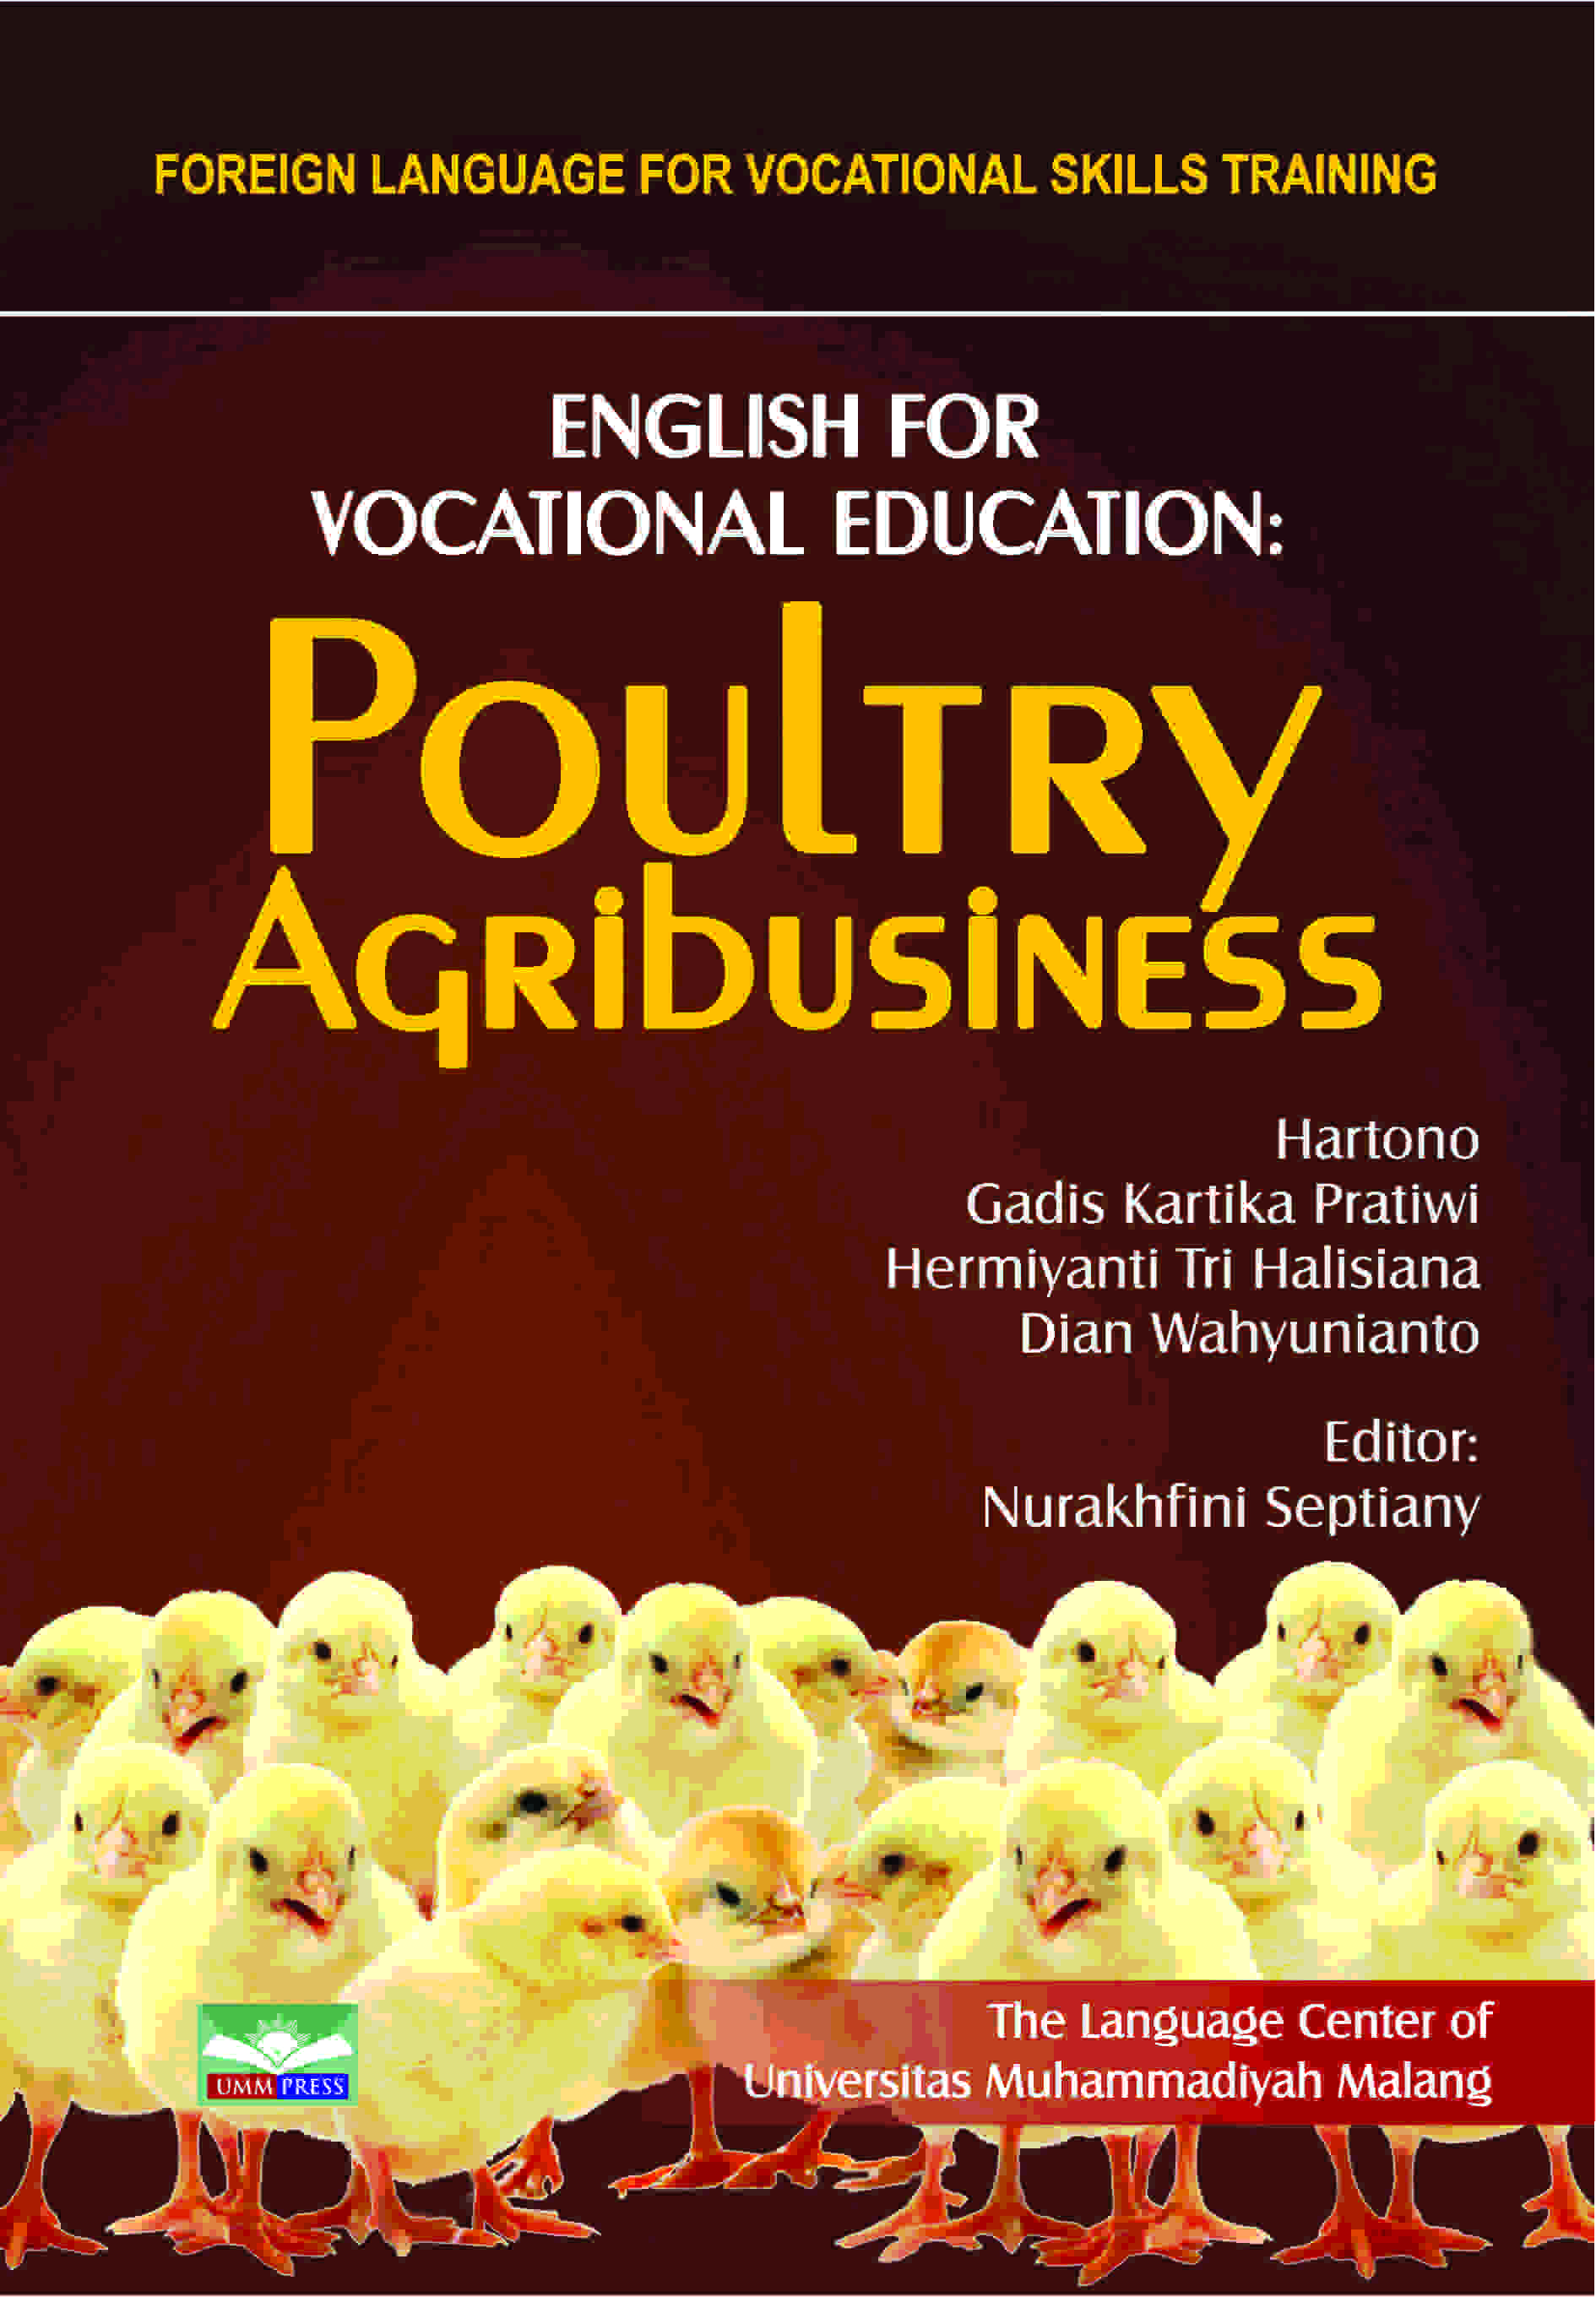 FLVST - ENGLISH FOR VOCATIONAL EDUCATION POULTRY AGRIBUSINESS